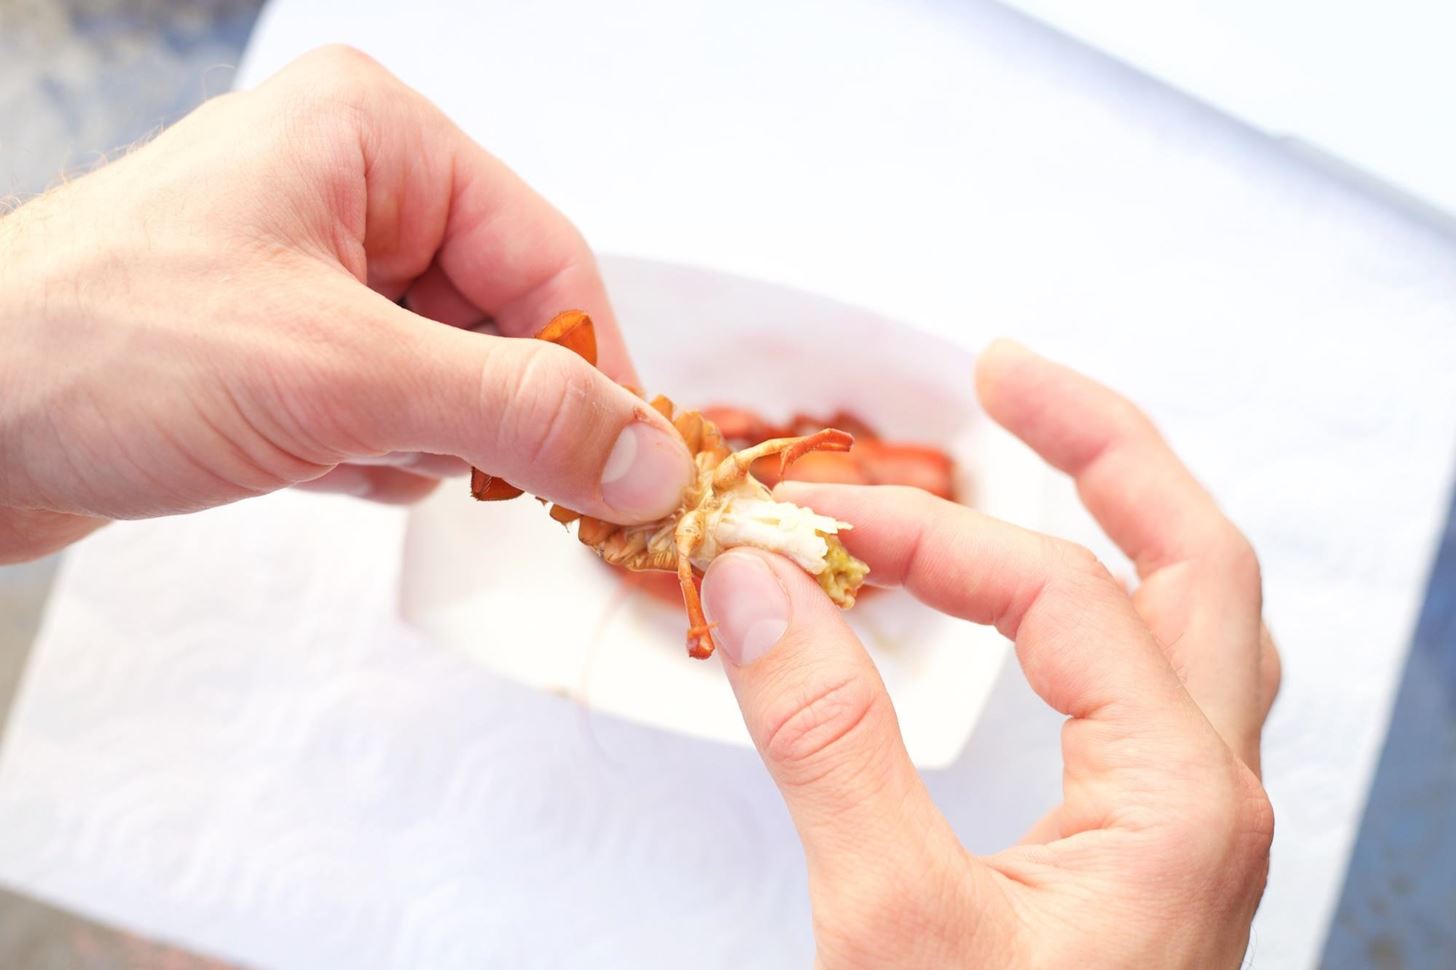 How to Eat Boiled Crawfish